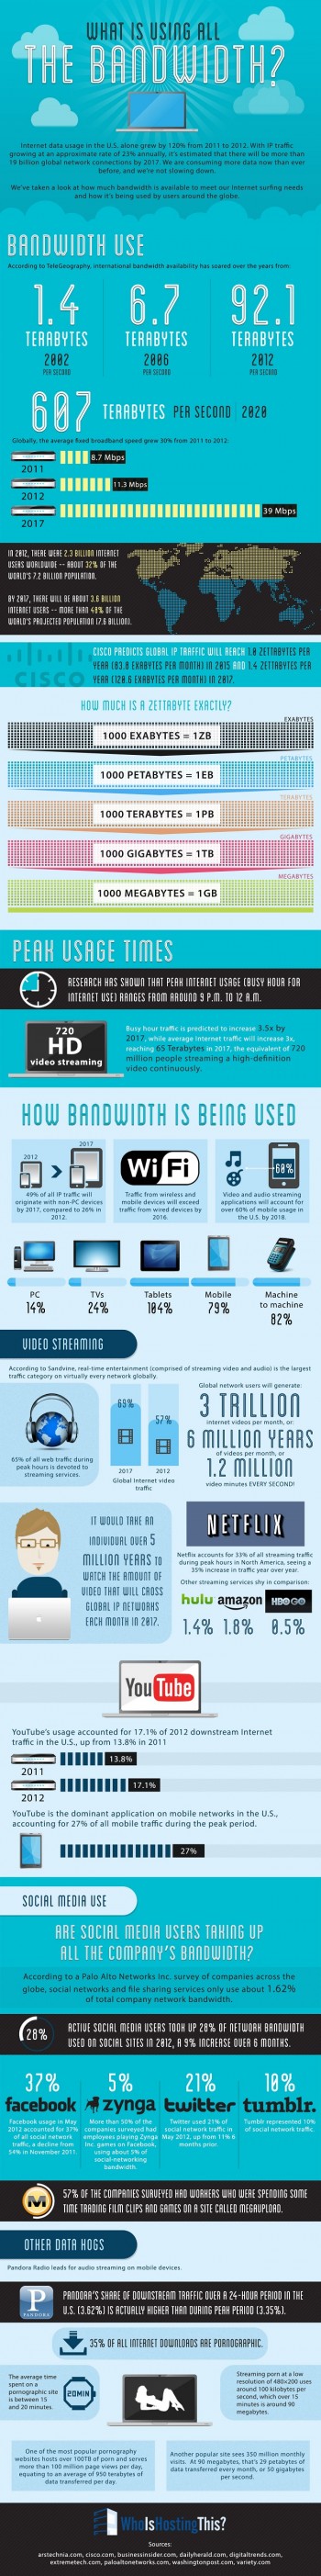 Infographic: Porn is using 35% of internet bandwidth